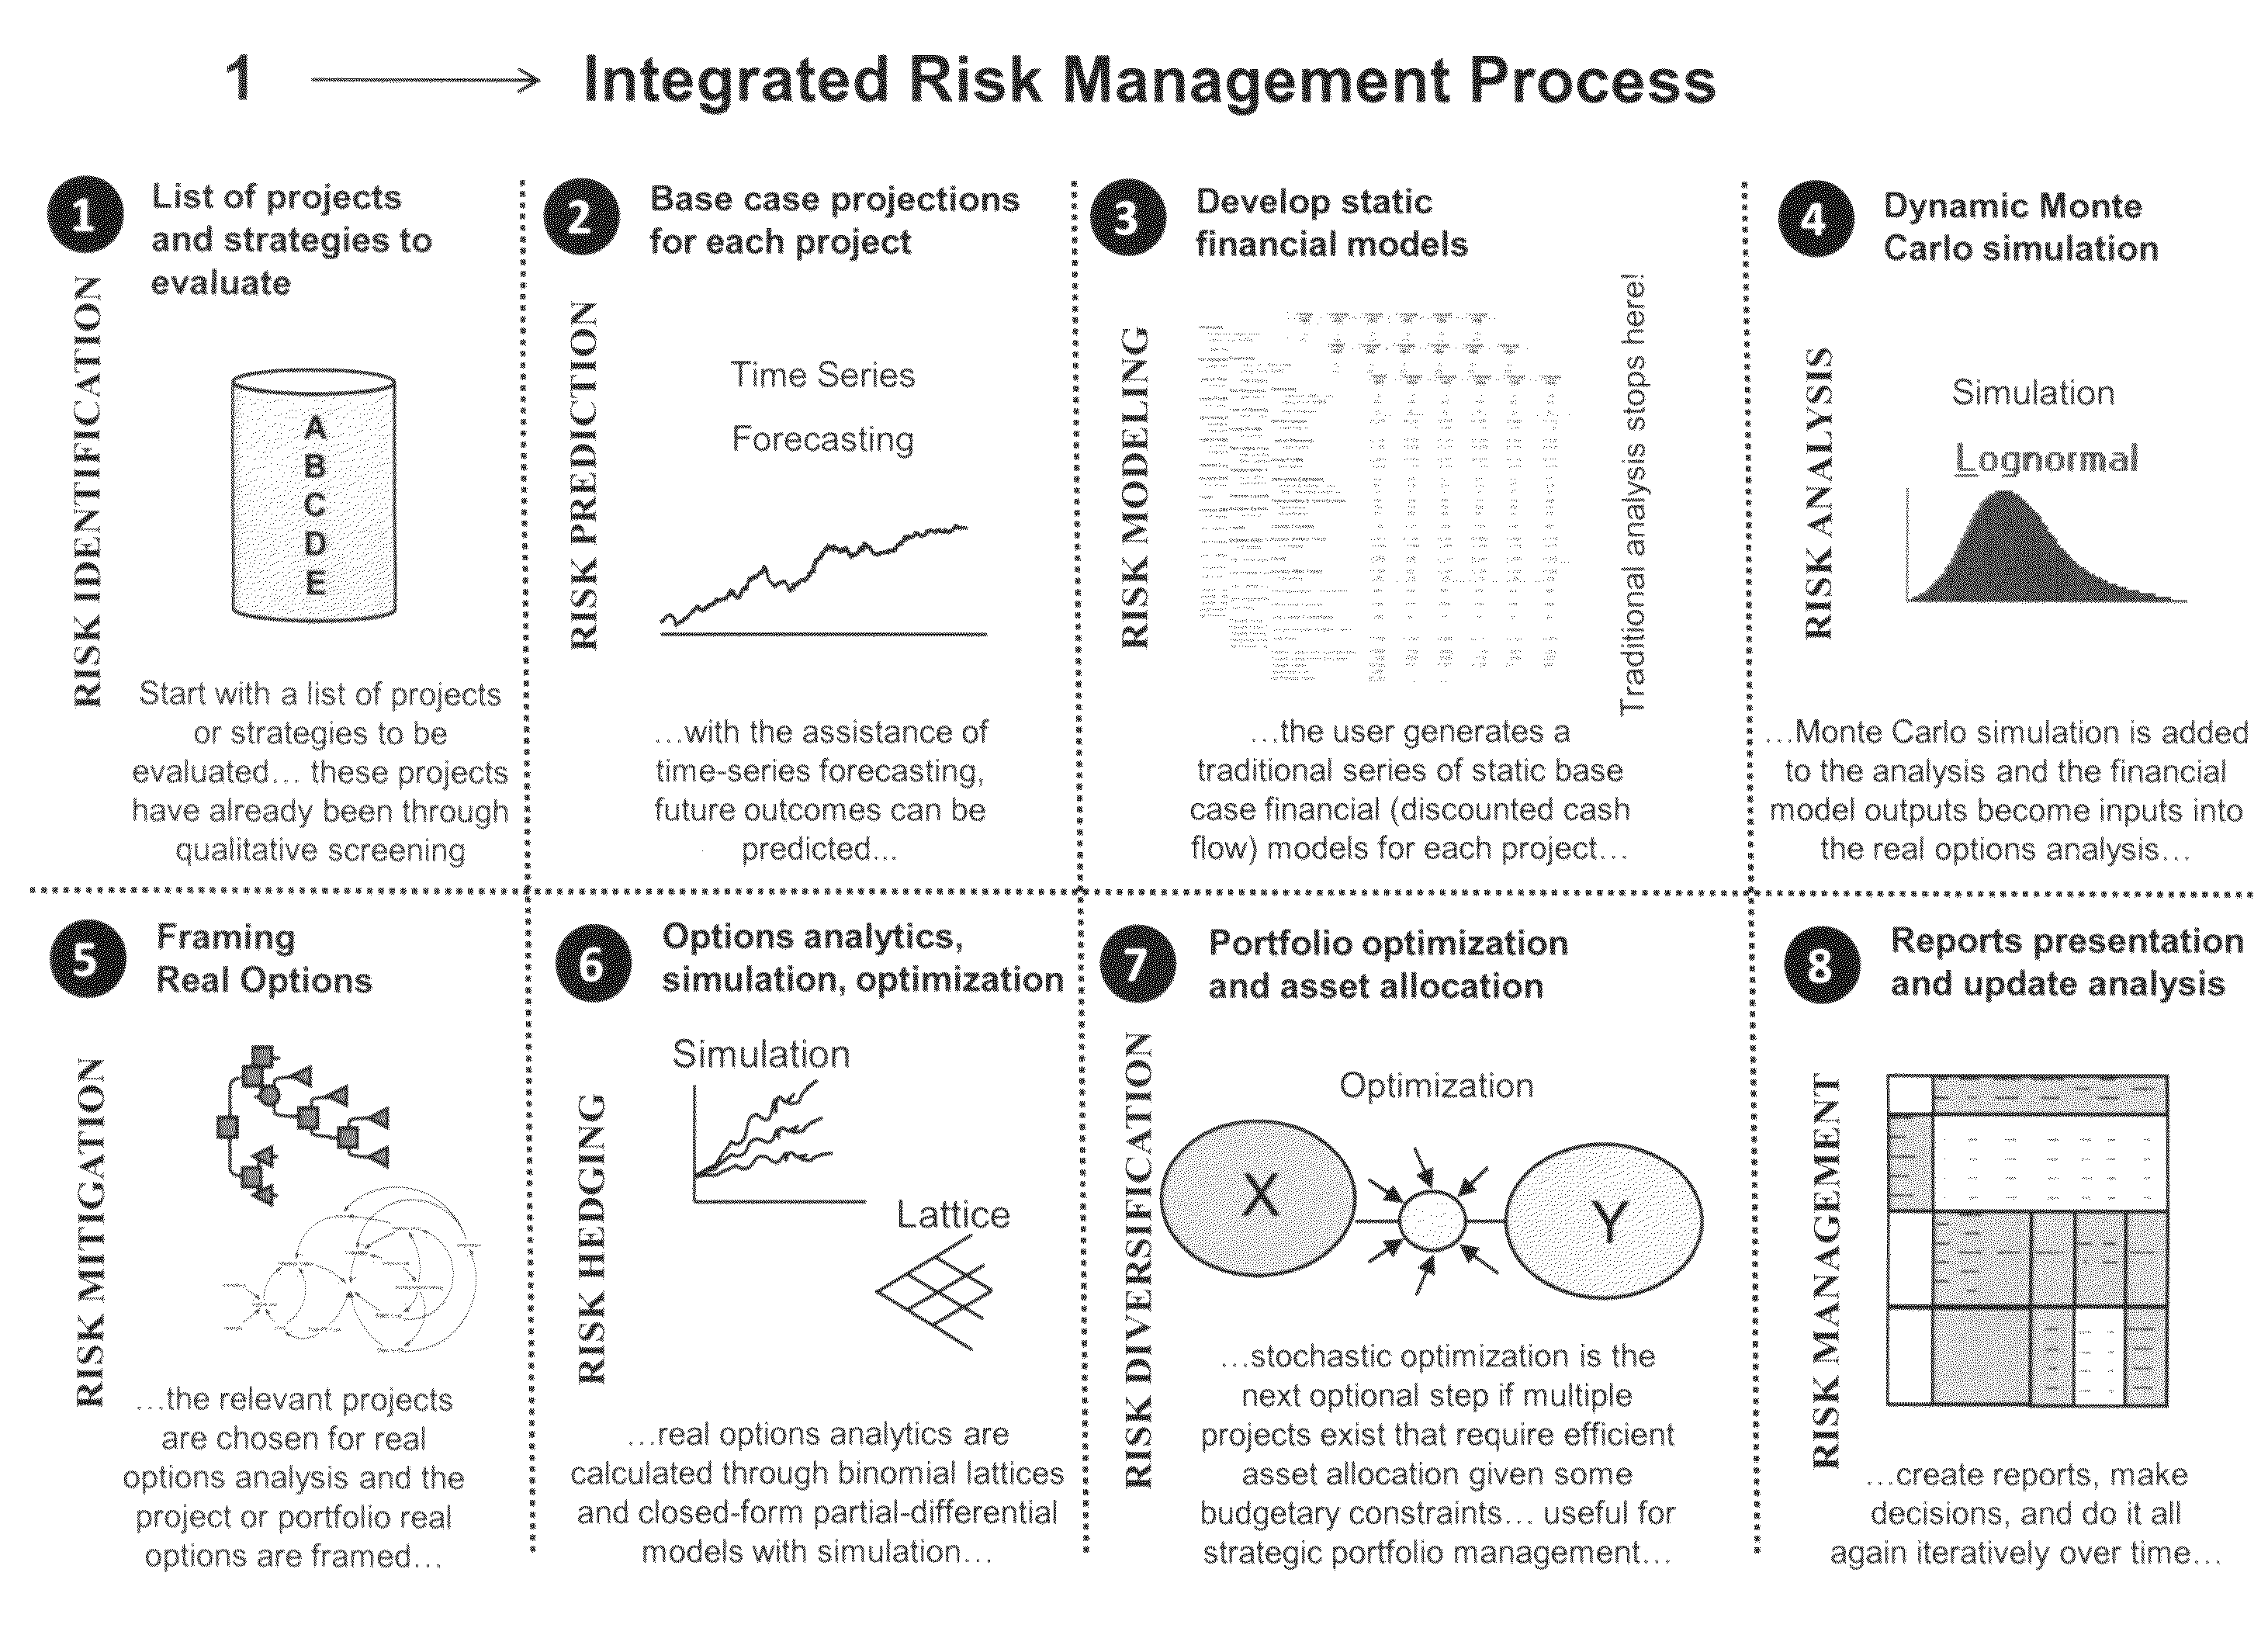 Integrated risk management process